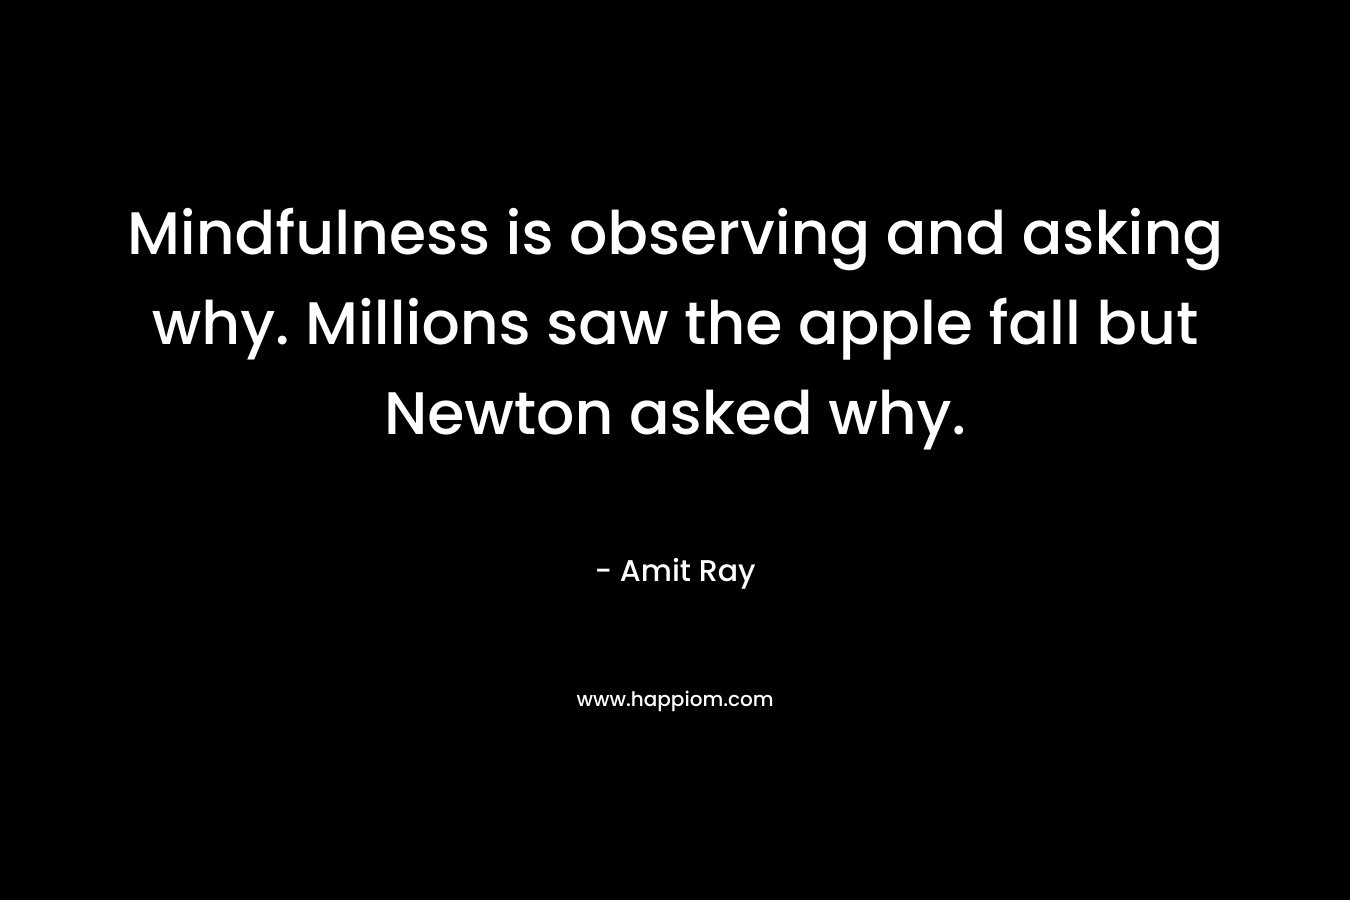 Mindfulness is observing and asking why. Millions saw the apple fall but Newton asked why.